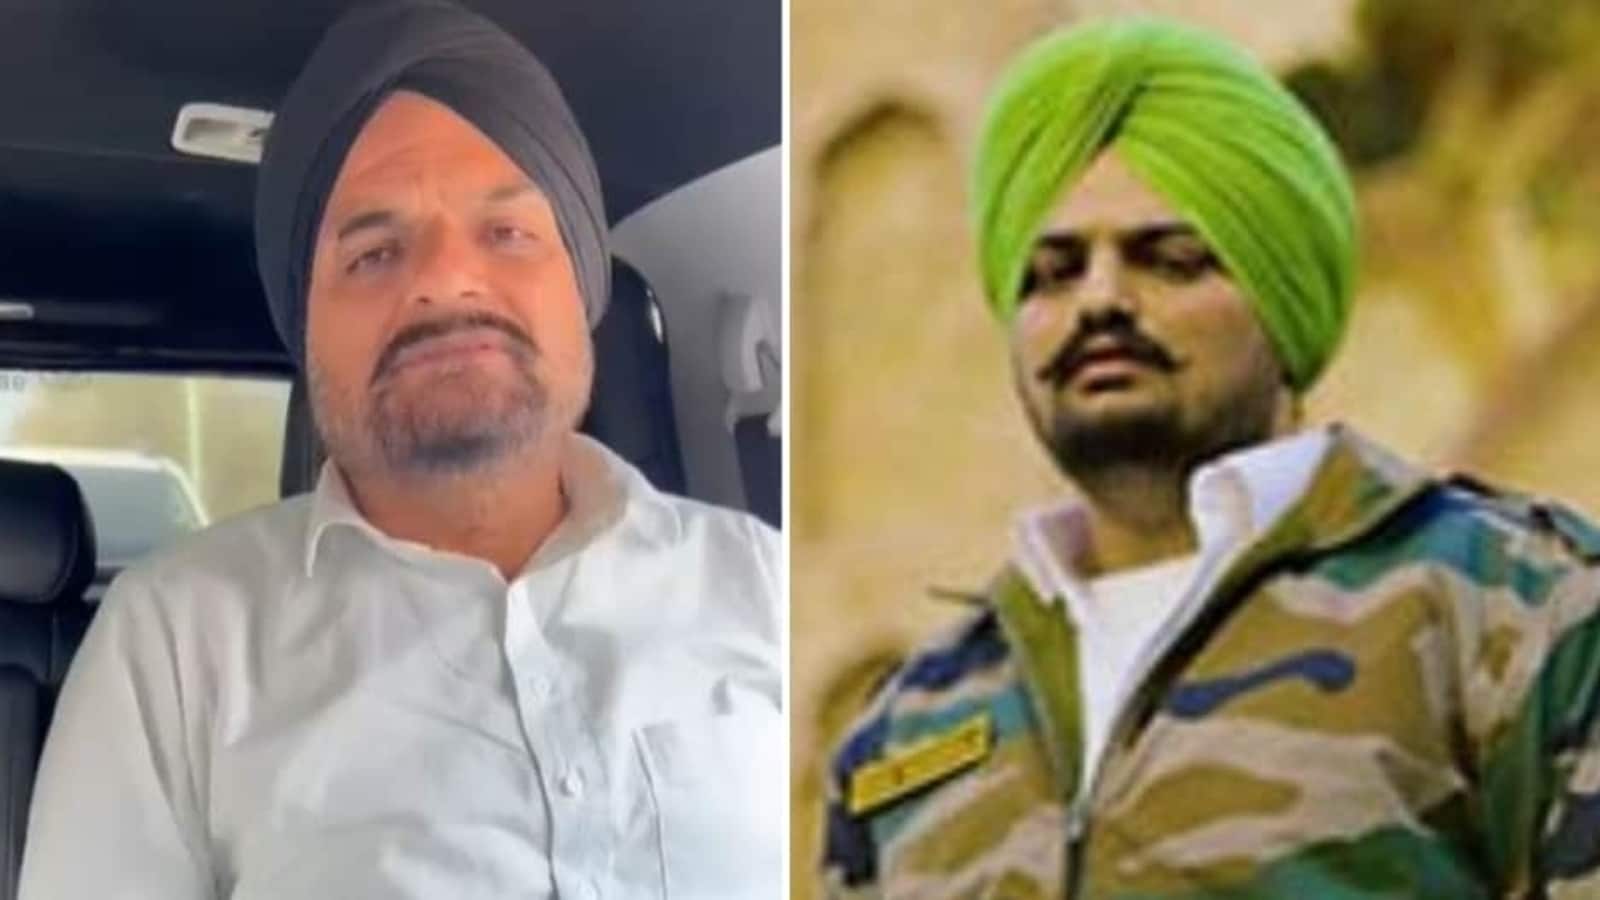 Sidhu Moose Wala's father says 'no intention of contesting any elections': ‘I’m not in a state to talk much'. Watch